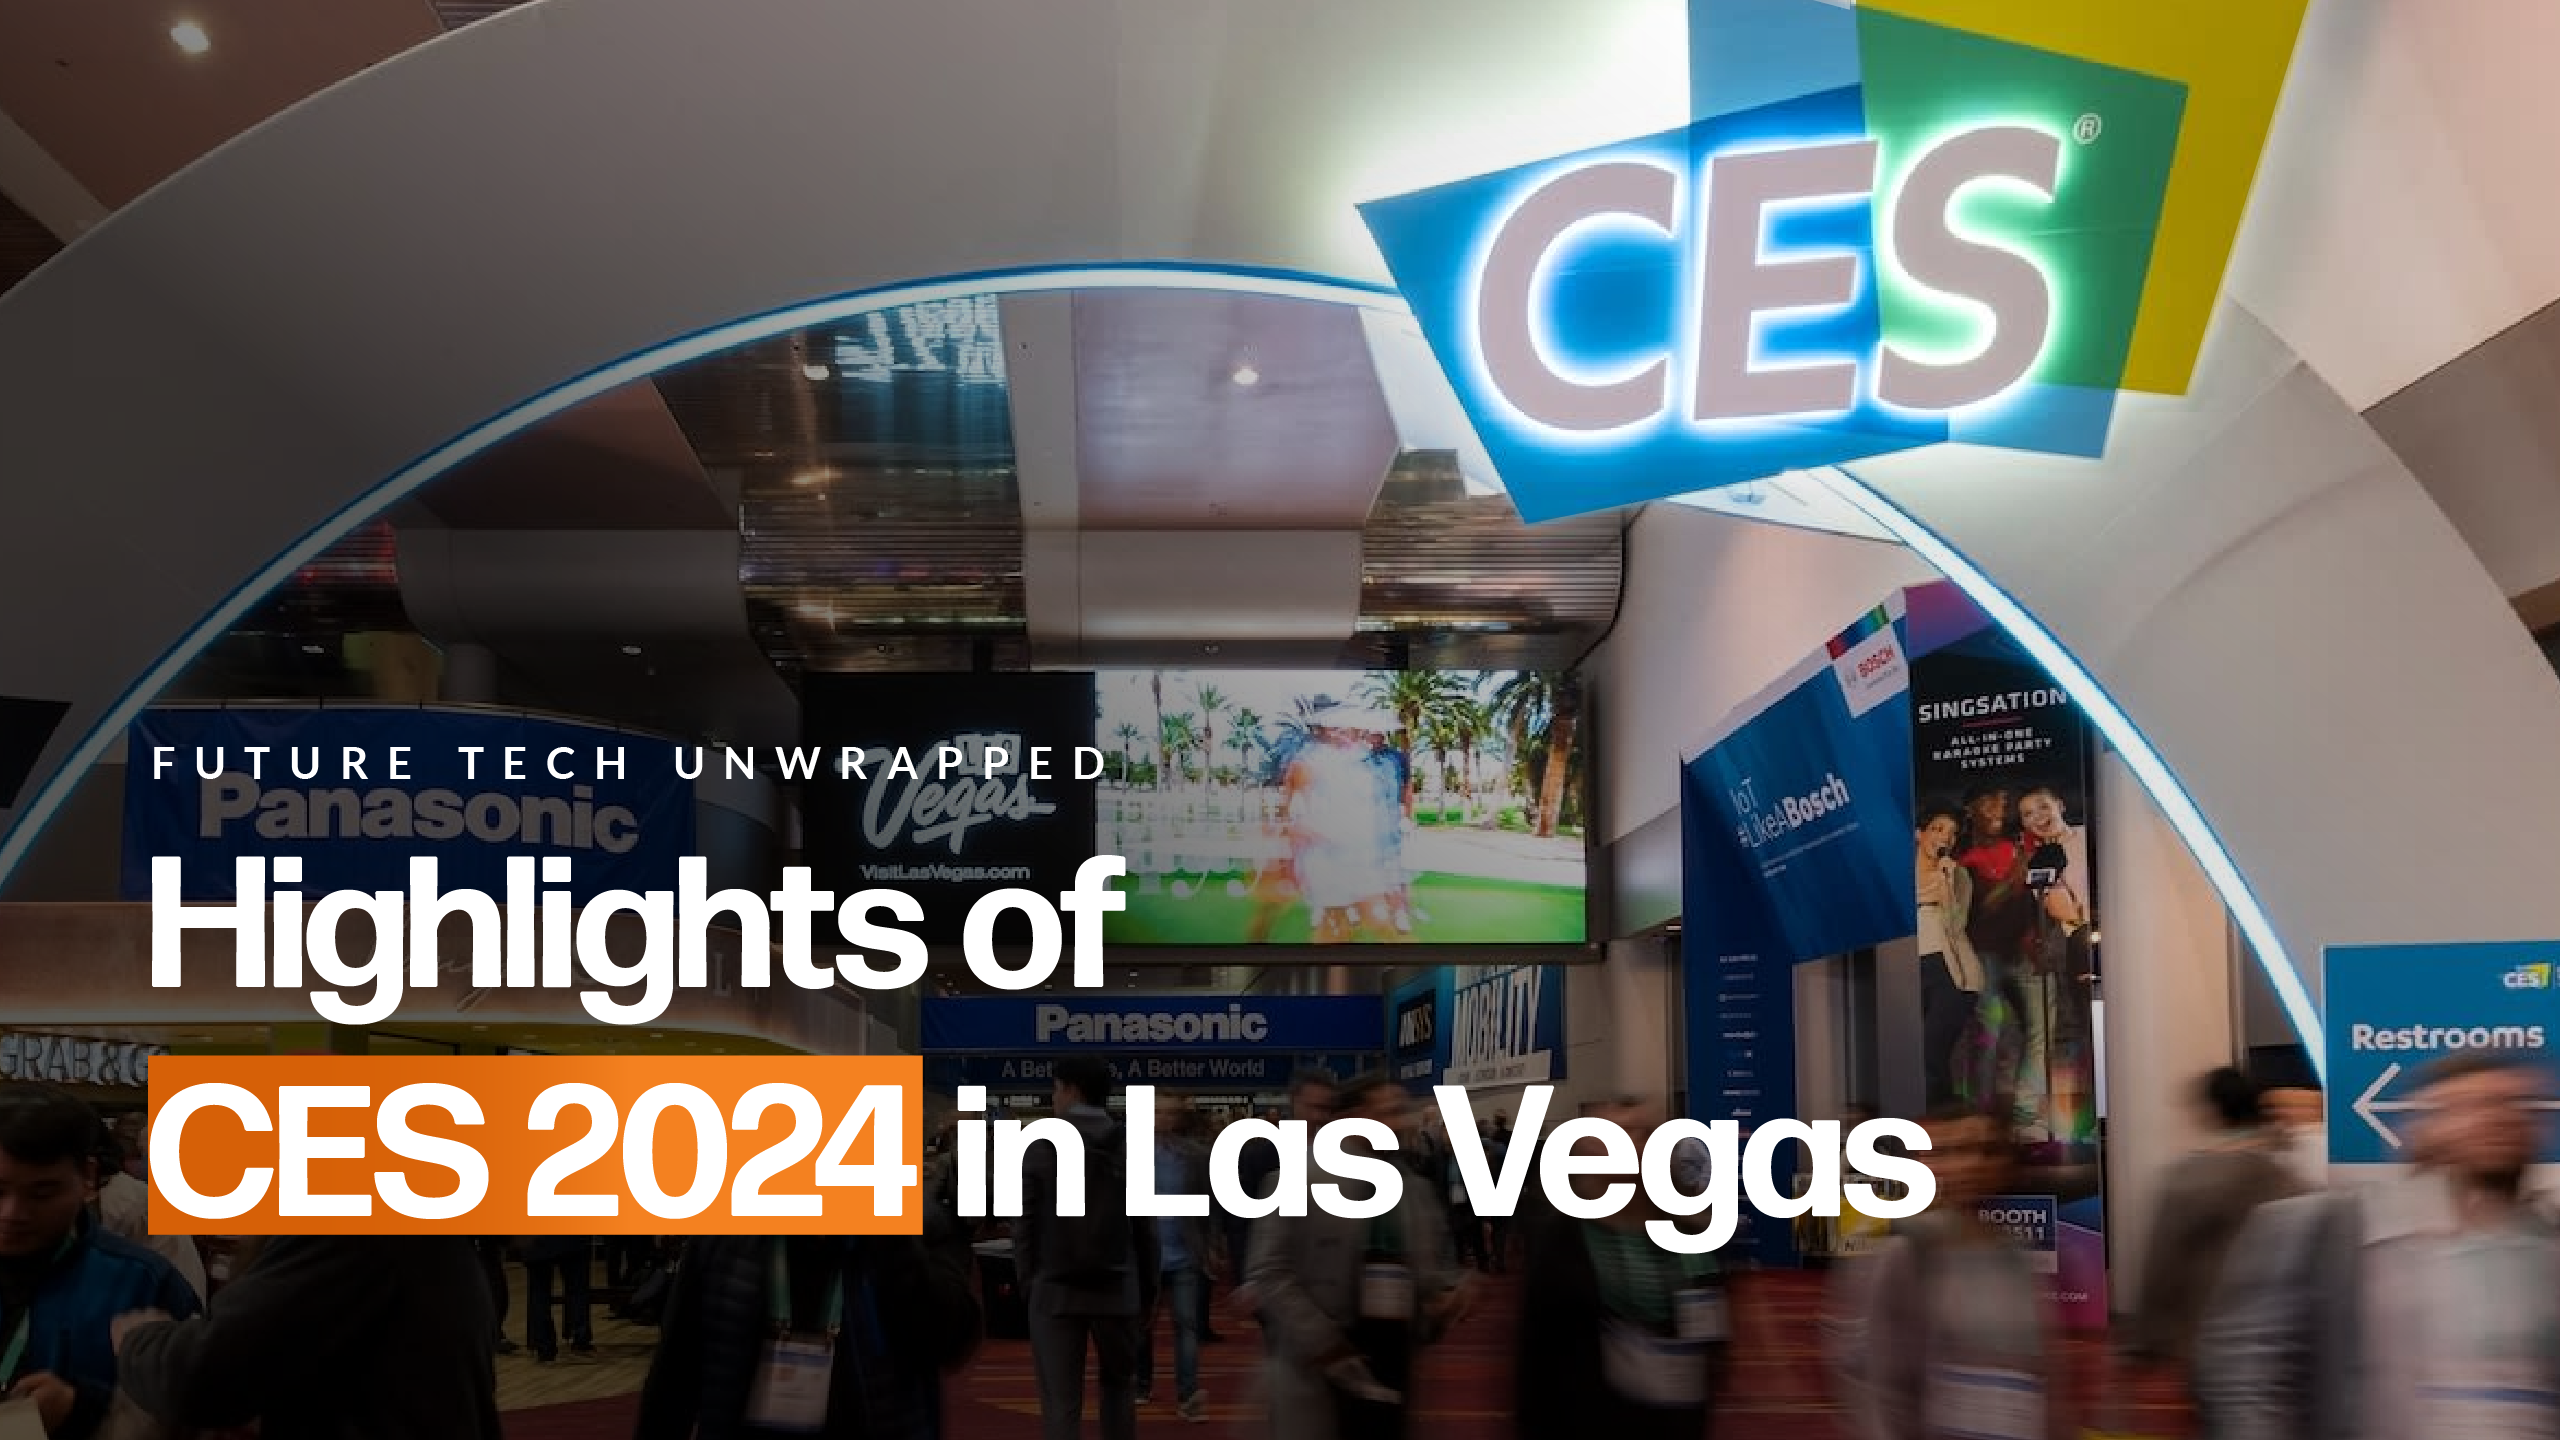 Future Tech Unwrapped: Highlights of CES 2024 in Las Vegas